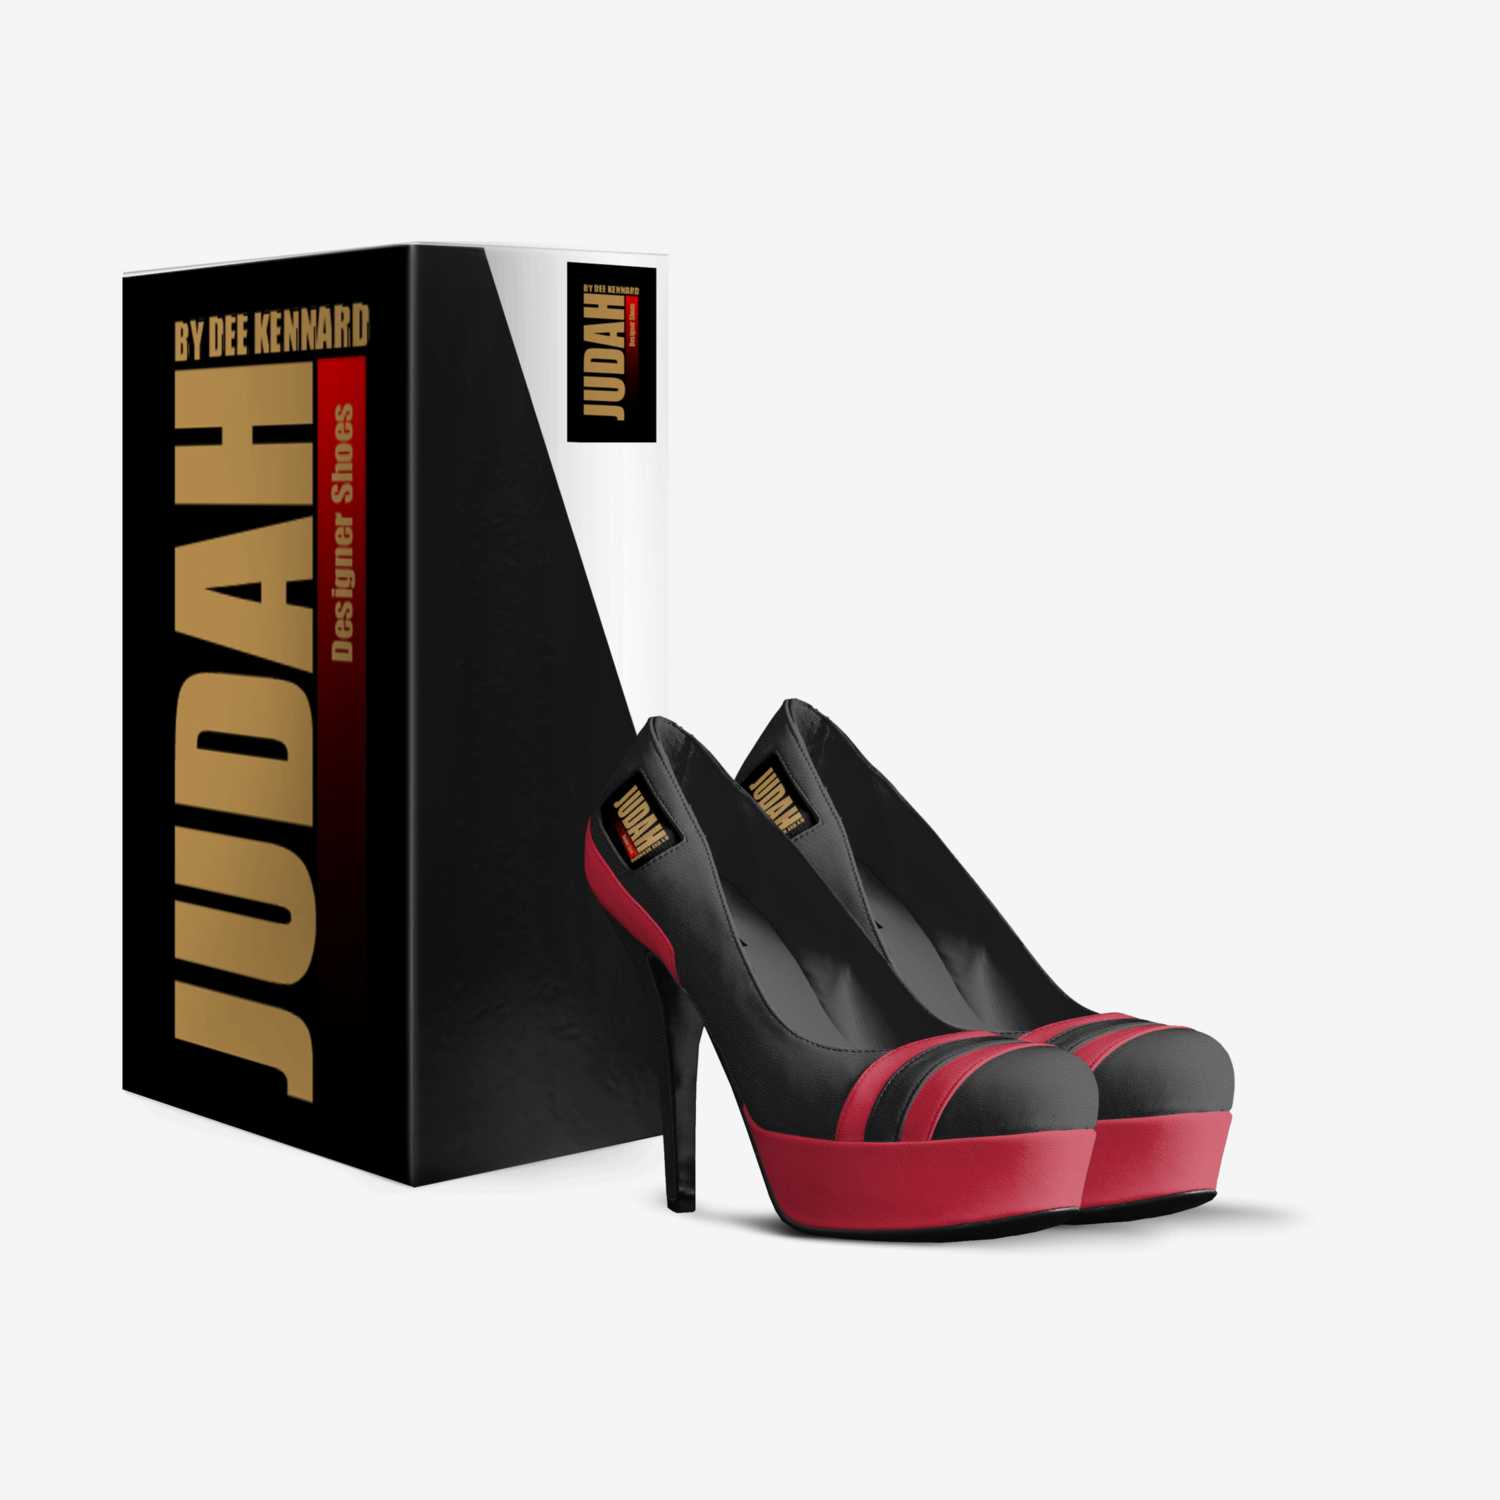 Judahwear Diva2017 custom made in Italy shoes by Dee Kennard | Box view